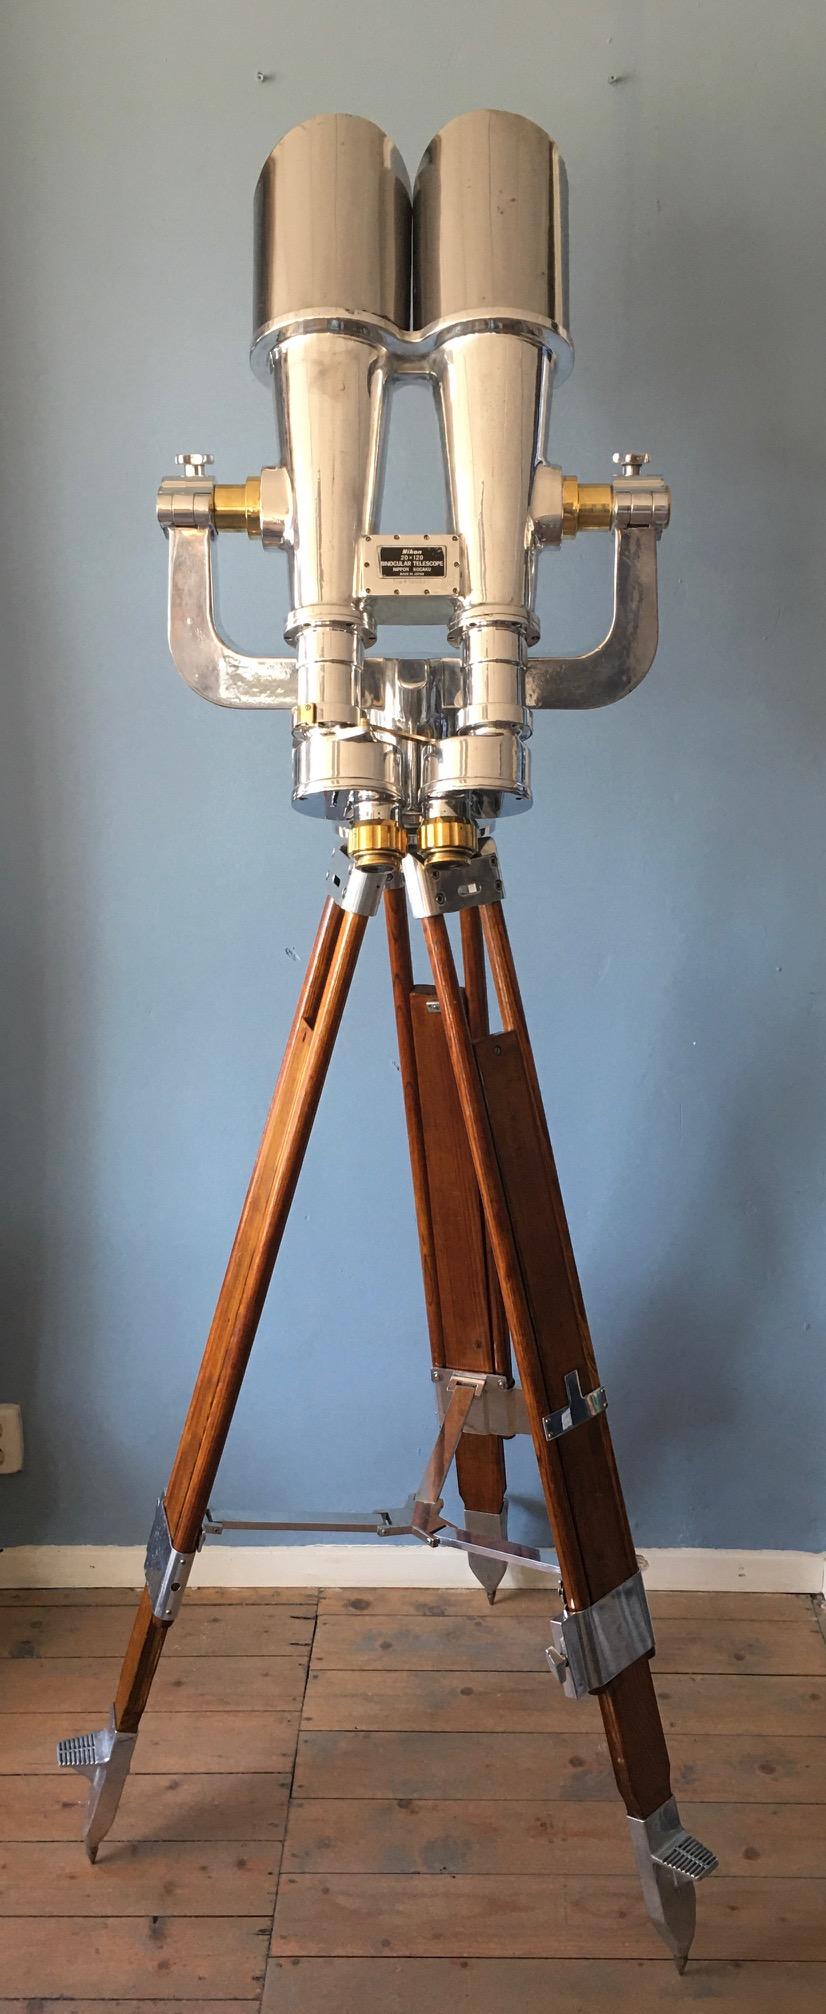 Large and powerful binoculars made by the Japanese company Nikon in the 1950s
An elegant and stylish piece for the study or library, and very suitable to take on board your yacht.
The binoculars have been professionally cleaned on the inside.
The